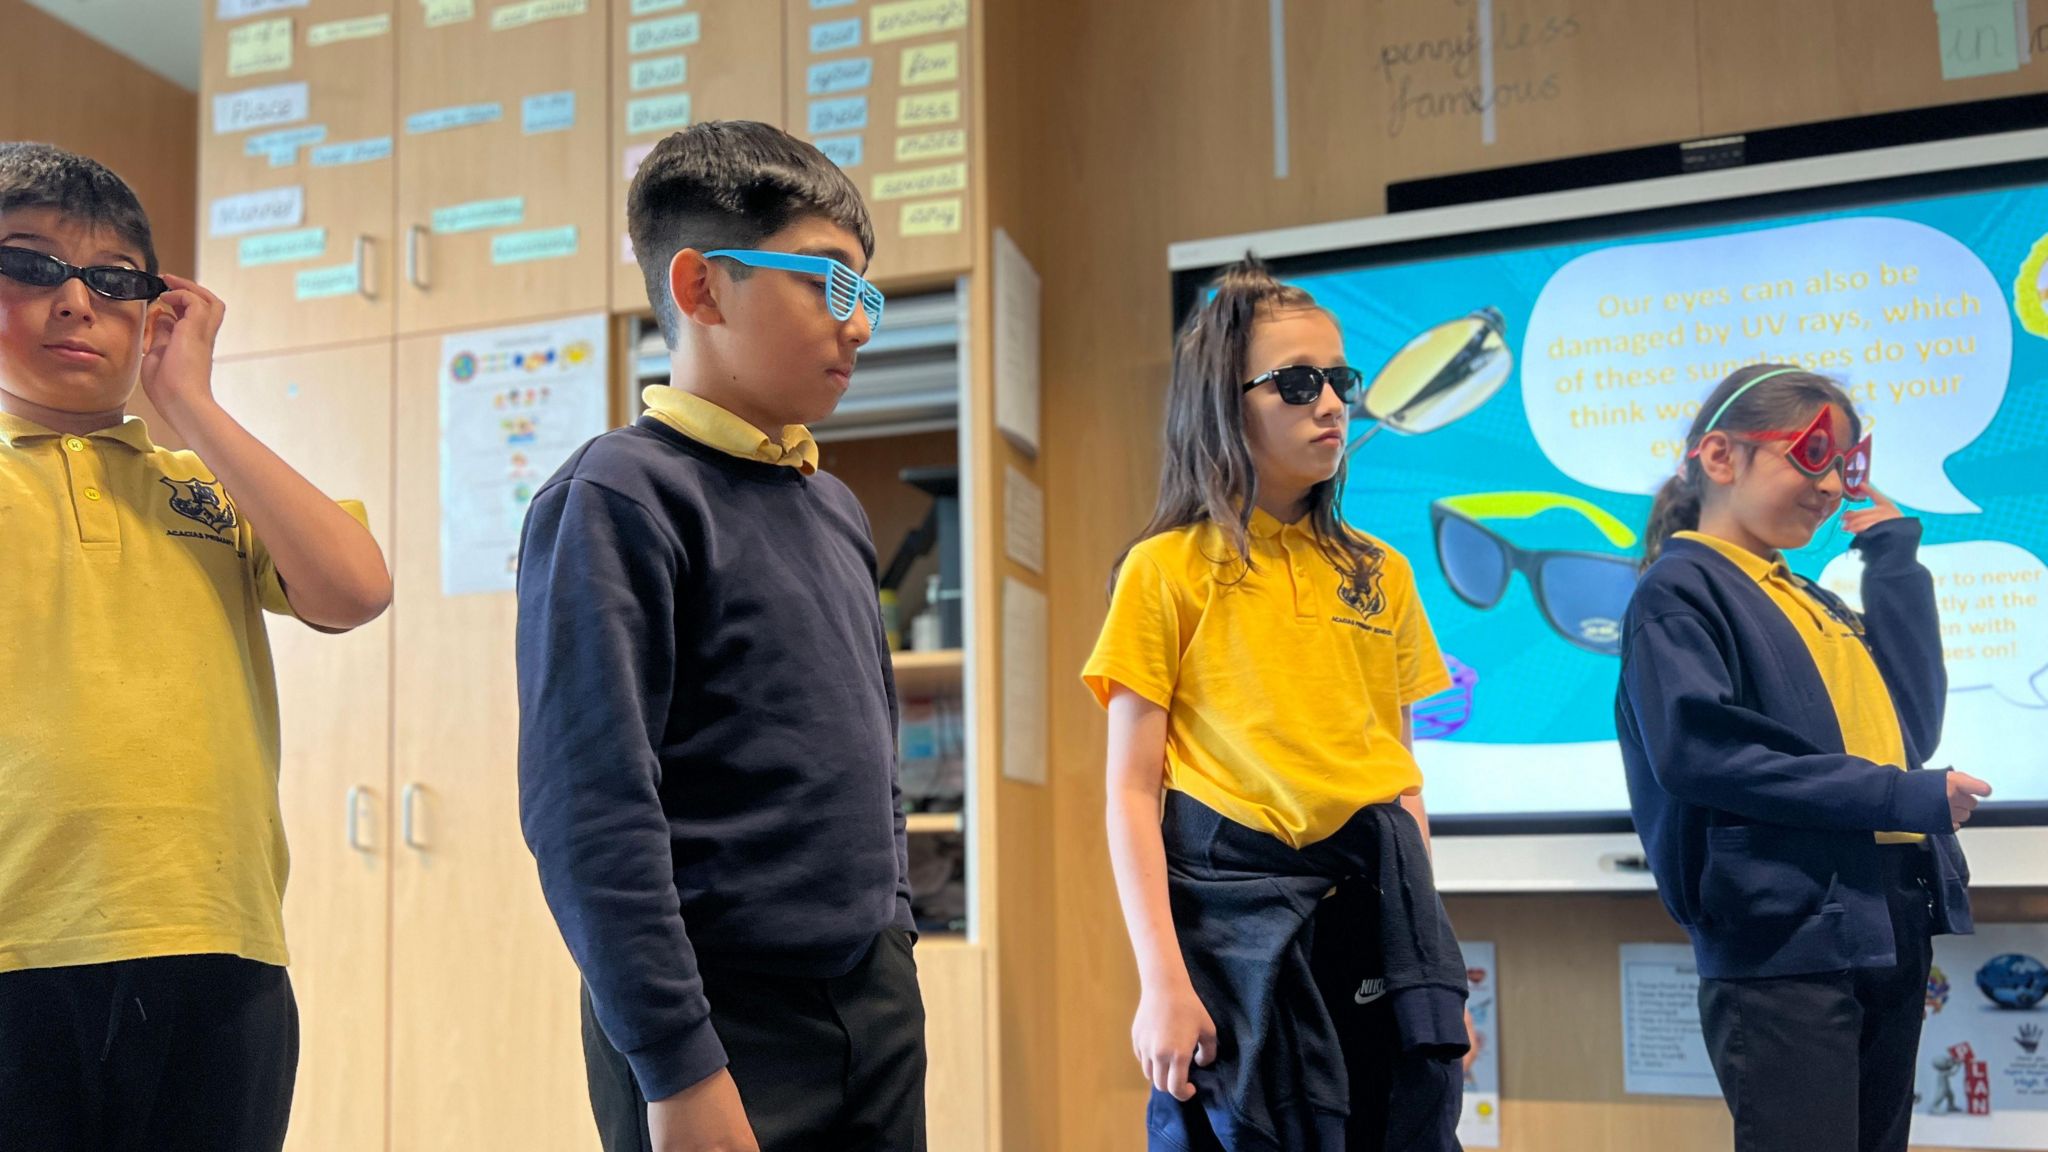 Pupils at Acacias Community Primary School play with sunglasses to learn about their protective qualities